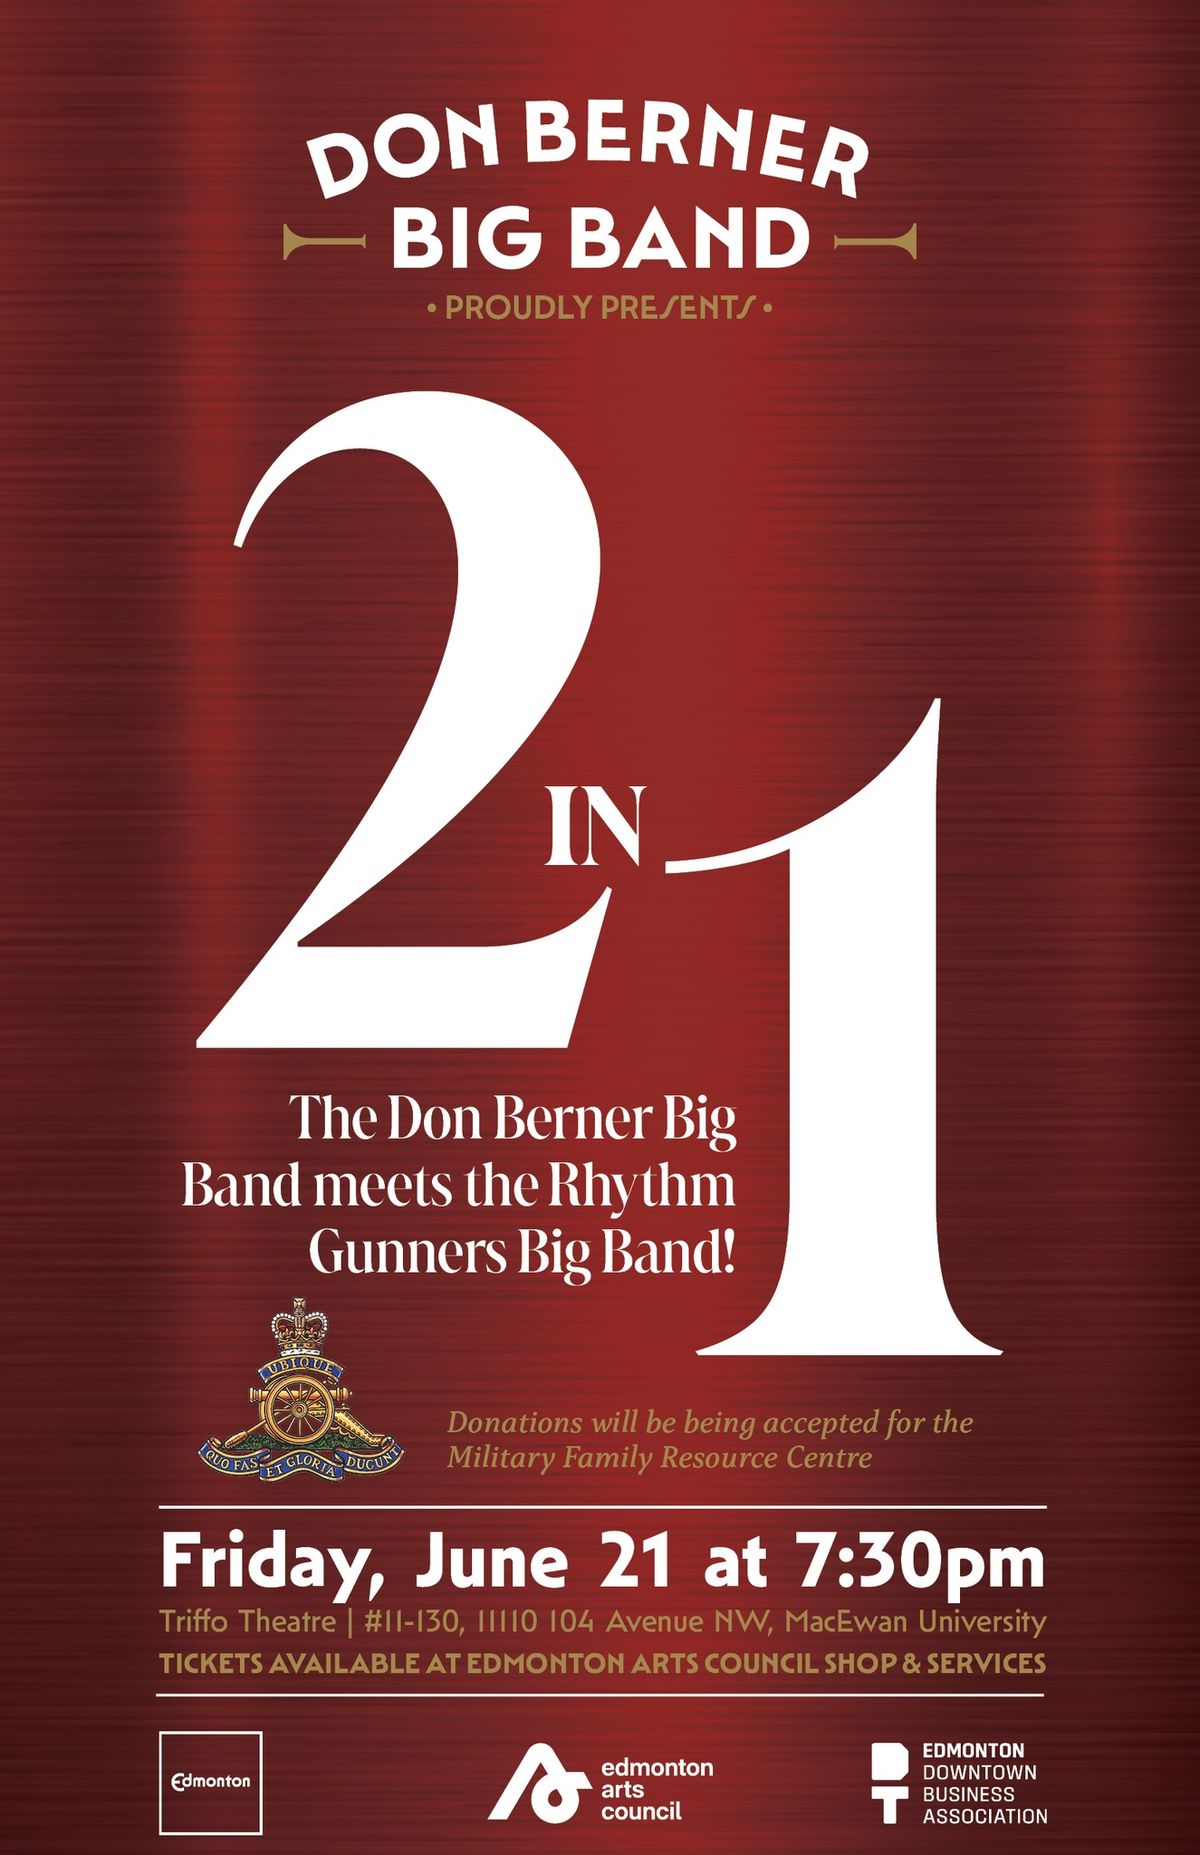 2 in 1: The Don Berner Big Band Meets the Rhythm Gunners Big Band!